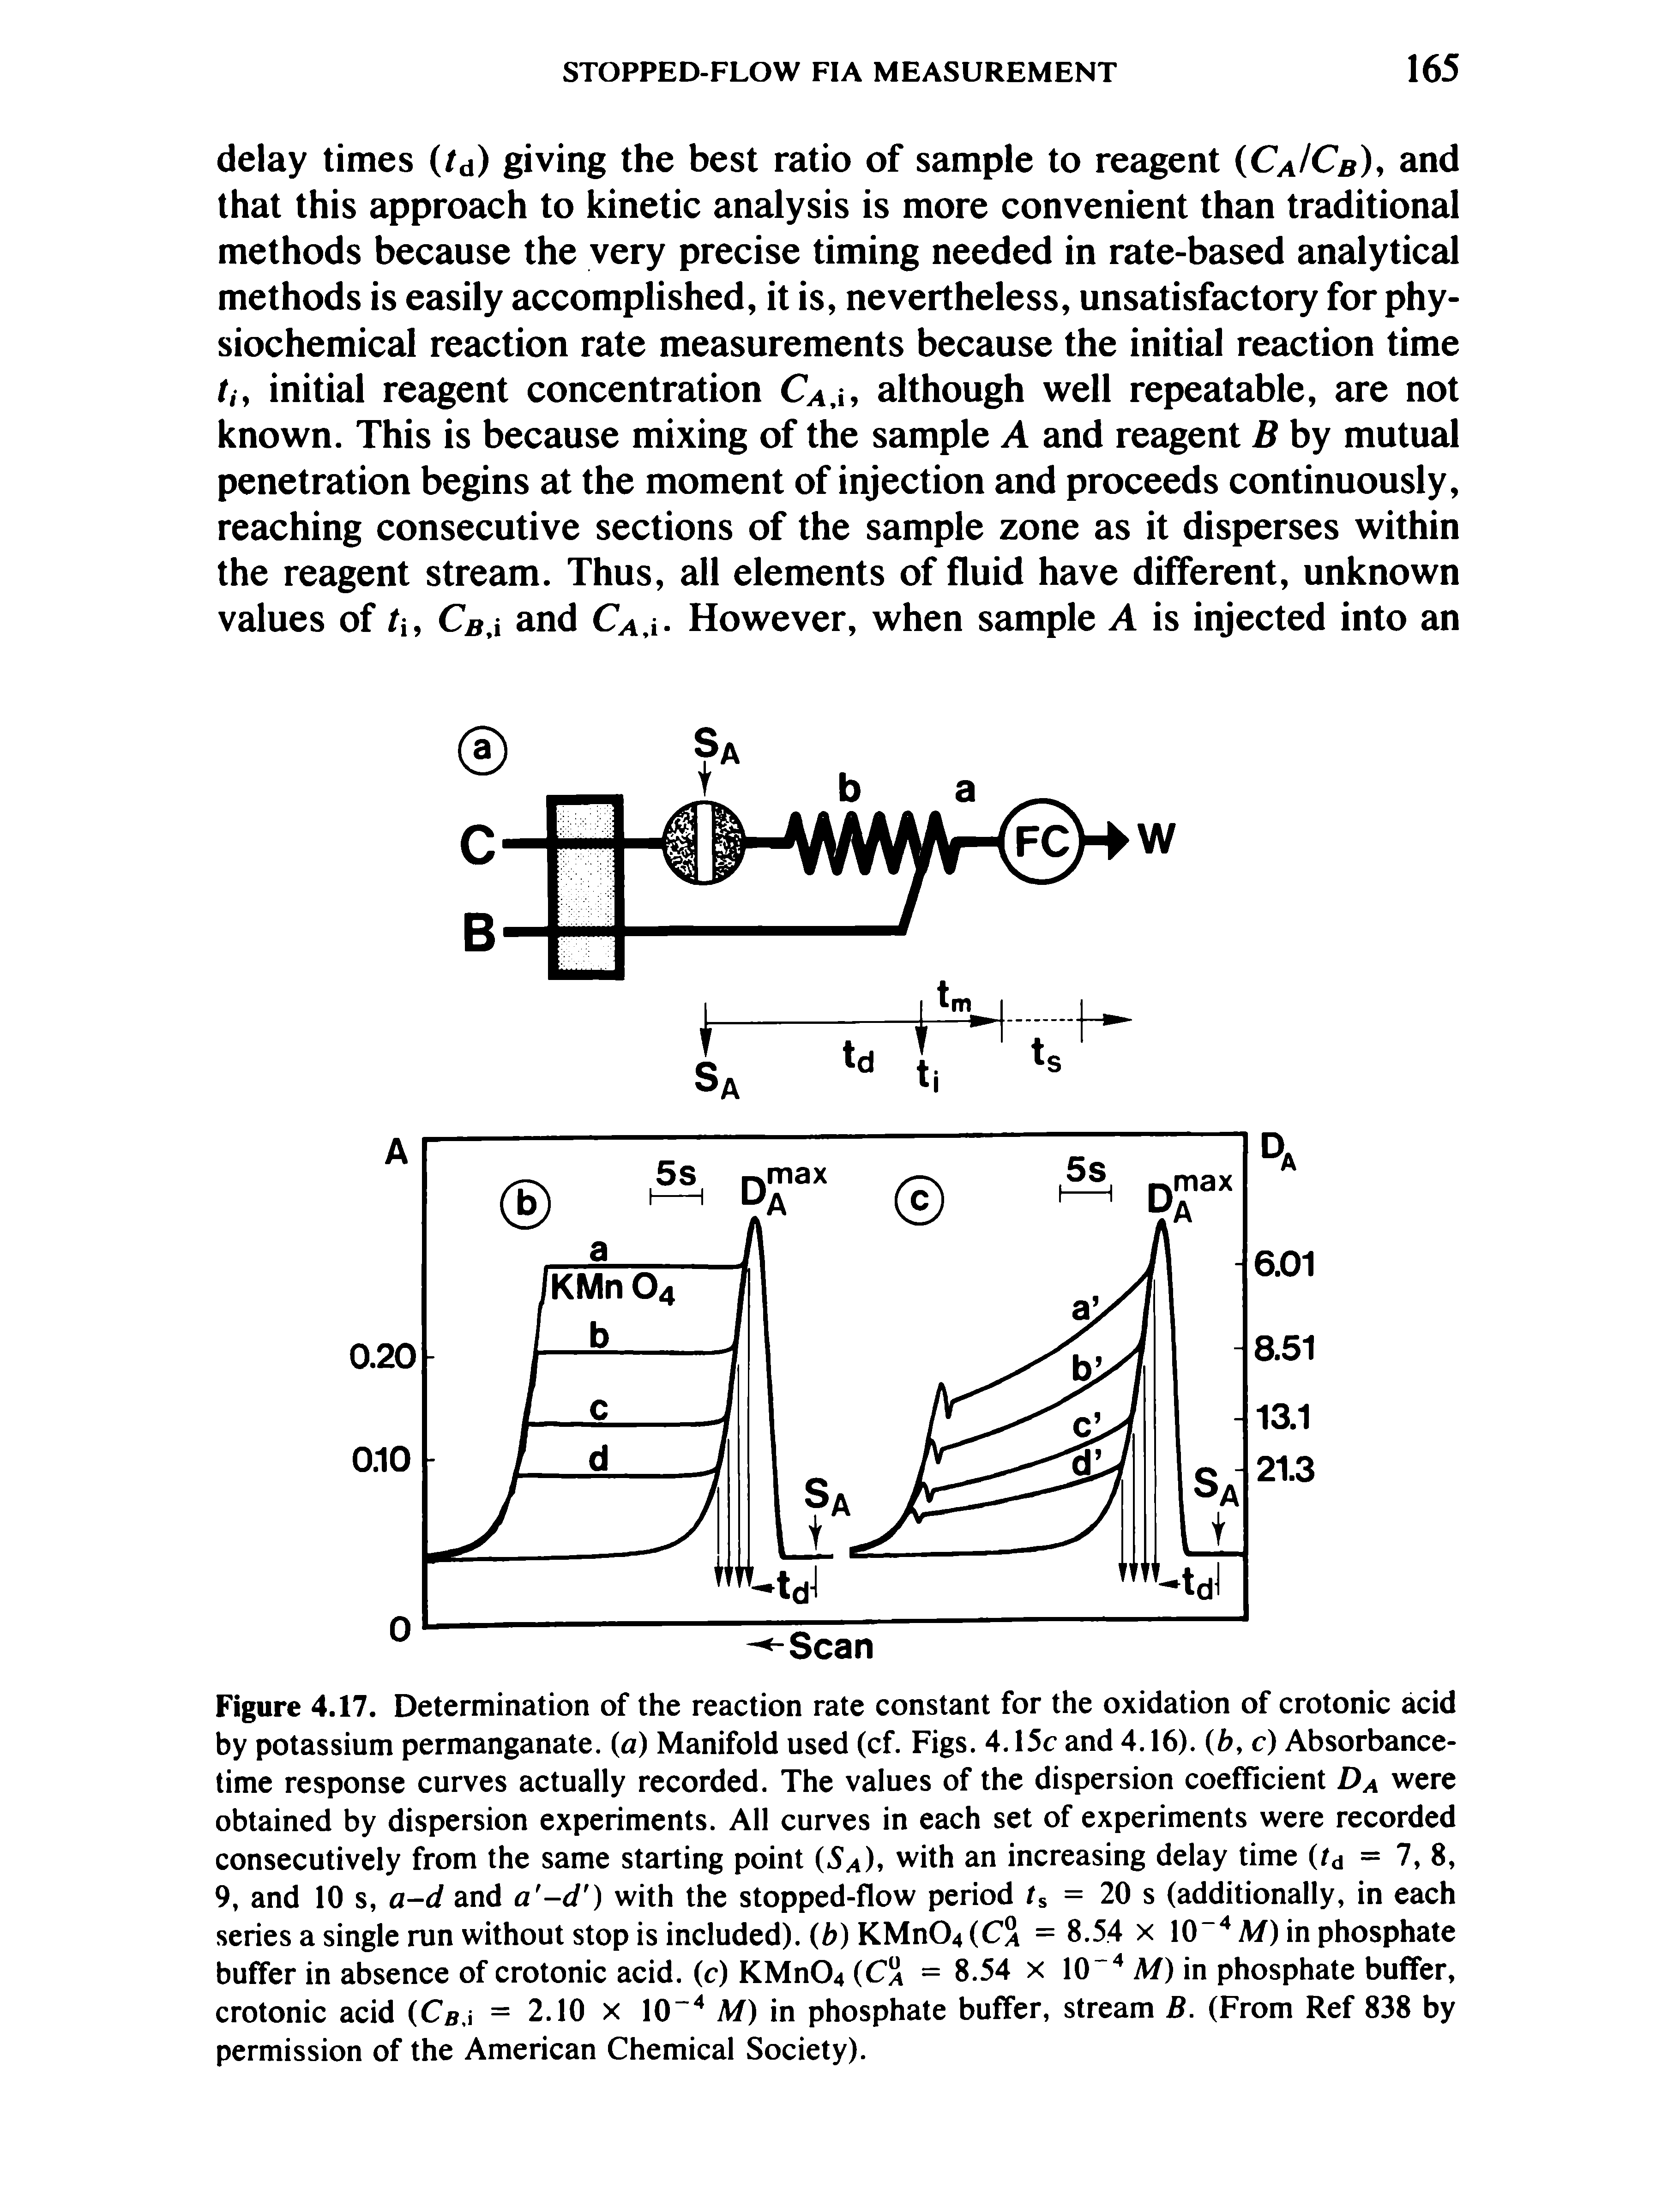 Figure 4.17. Determination of the reaction rate constant for the oxidation of crotonic acid by potassium permanganate, (a) Manifold used (cf. Figs. 4.15c and 4.16). b, c) Absorbancetime response curves actually recorded. The values of the dispersion coefficient Da were obtained by dispersion experiments. All curves in each set of experiments were recorded consecutively from the same starting point (5 ), with an increasing delay time (td - 7, 8, 9, and 10 s, a-d and a -d ) with the stopped-flow period /s = 20 s (additionally, in each series a single run without stop is included), b) KMn04 (C° = 8.54 x lO"" M) in phosphate buffer in absence of crotonic acid, (c) KMn04 (Cli = 8.54 x lO"" M) in phosphate buffer, crotonic acid (C j = 2.10 x lO"" M) in phosphate buffer, stream B. (From Ref 838 by permission of the American Chemical Society).